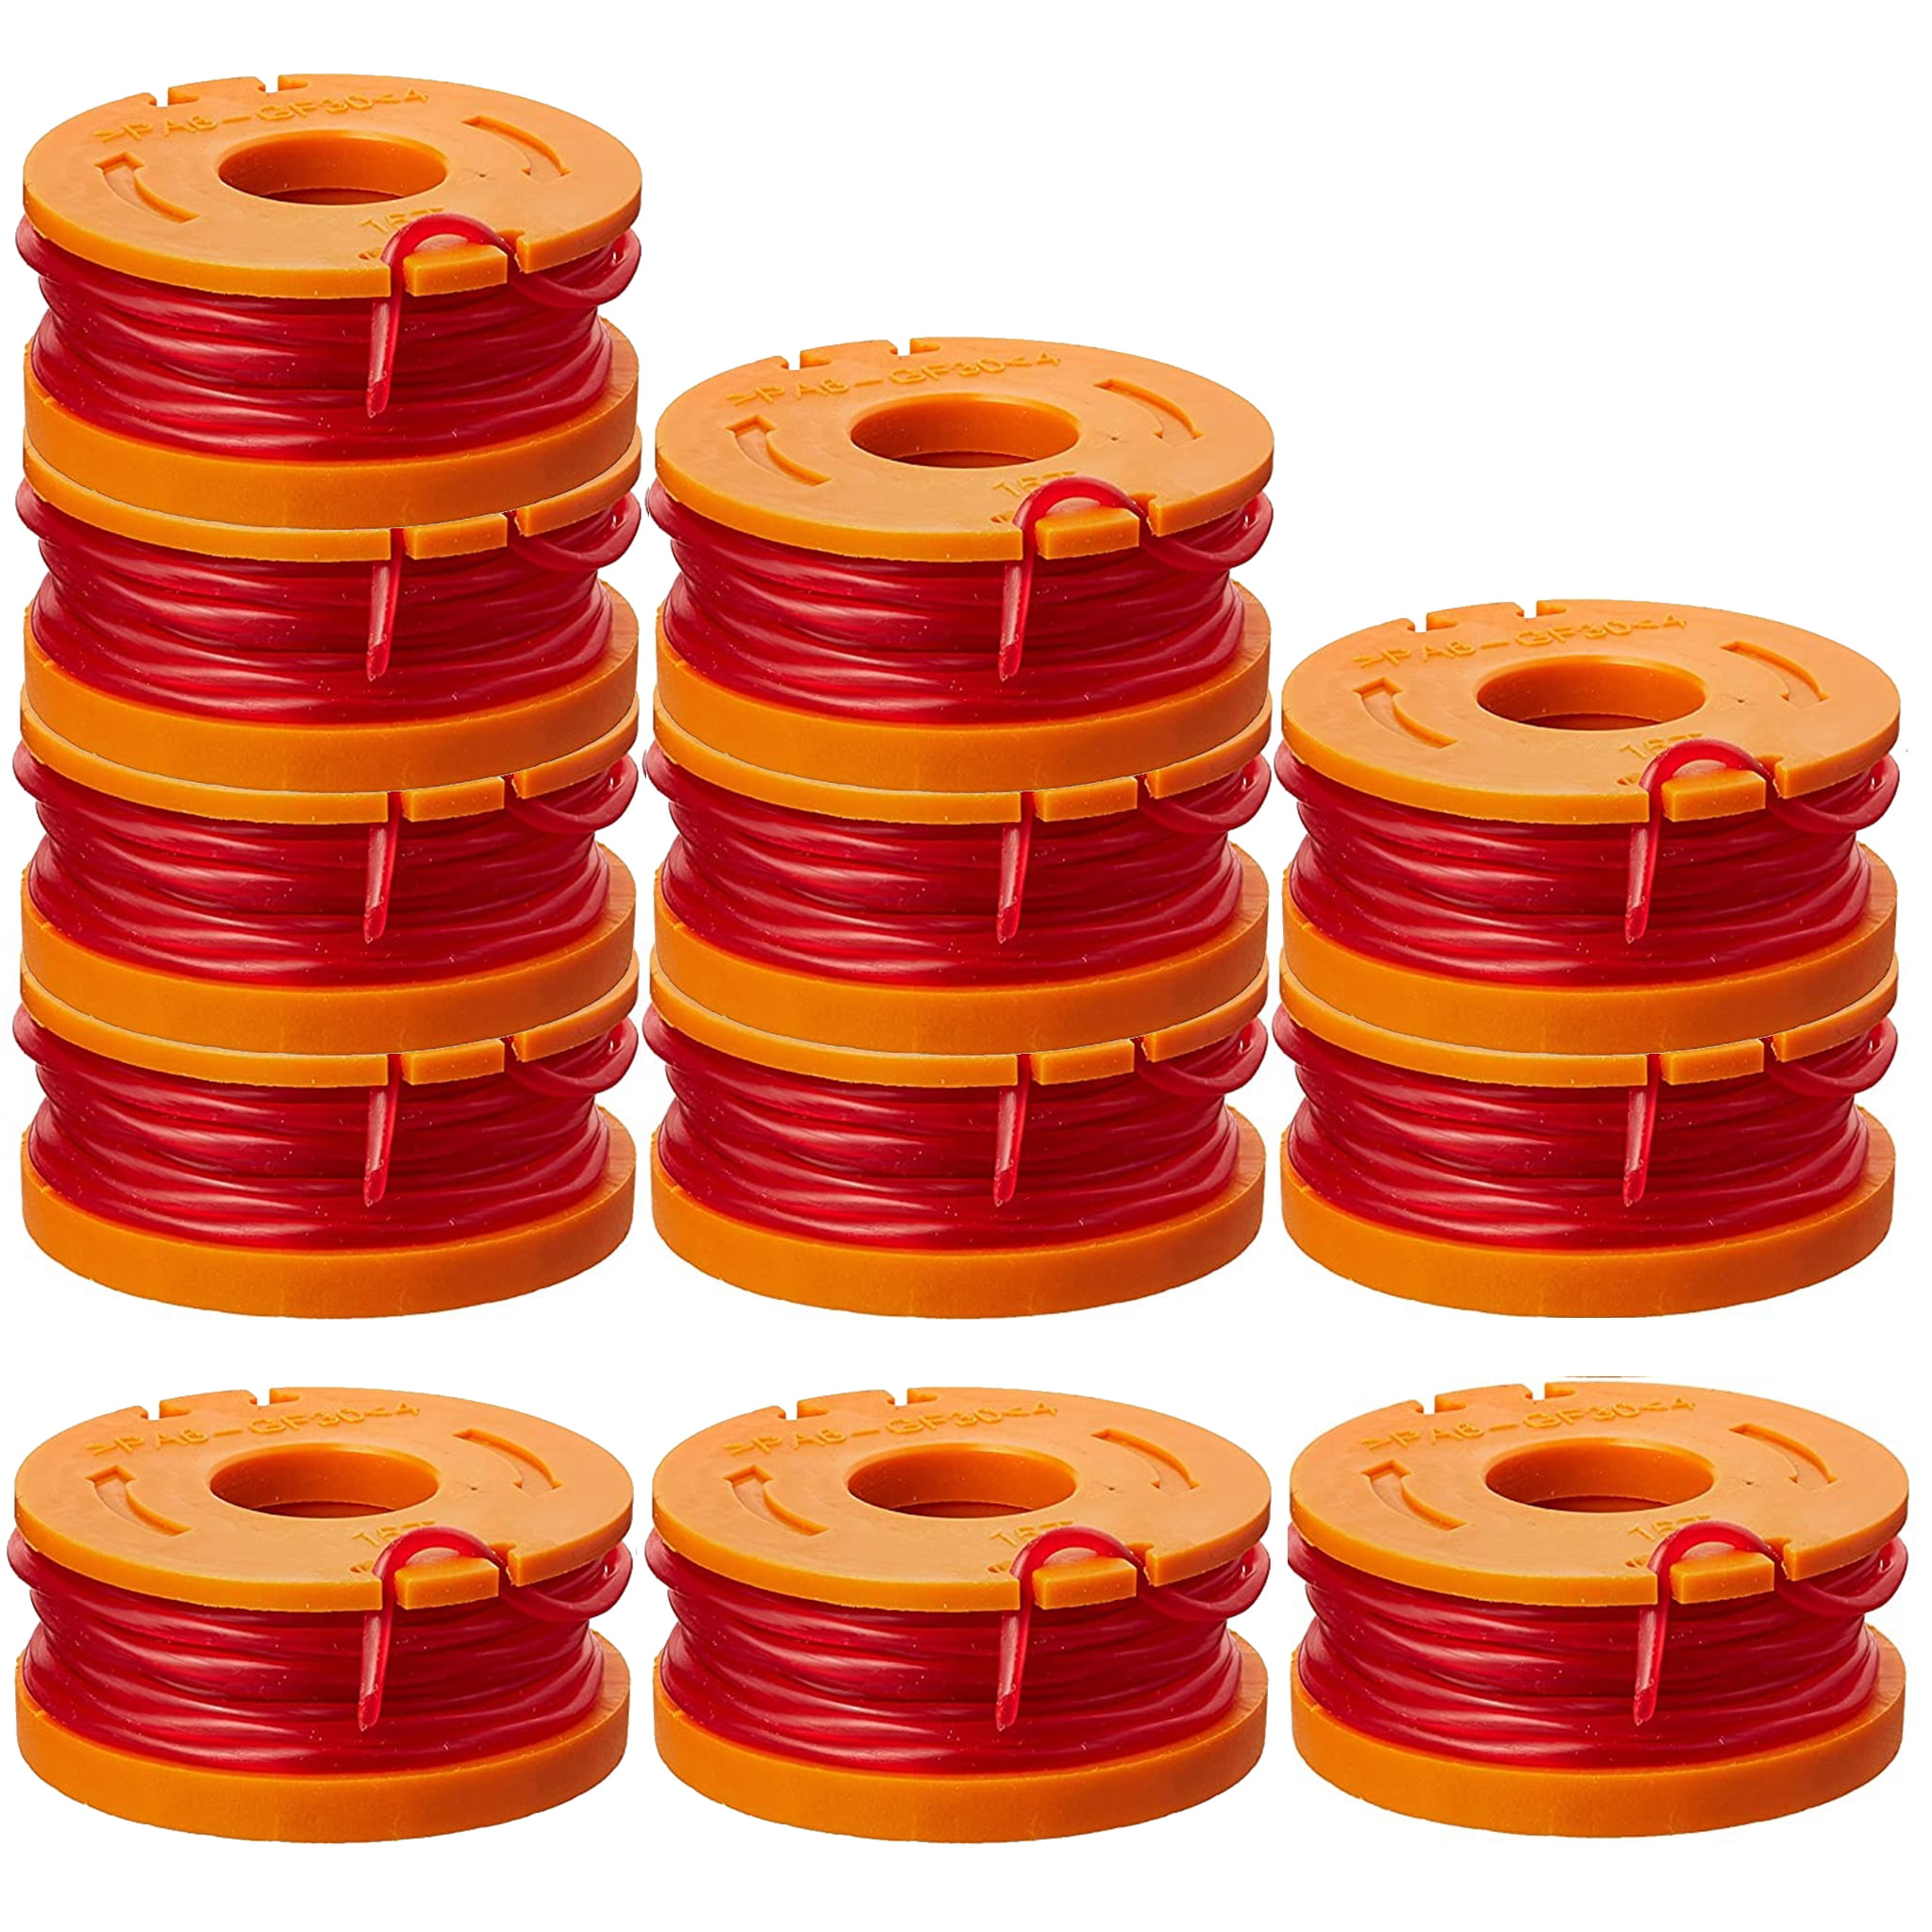 WORX Replacement Spool Line For Grass Trimmer/Edger,10ft WG150 151 152 154 155 